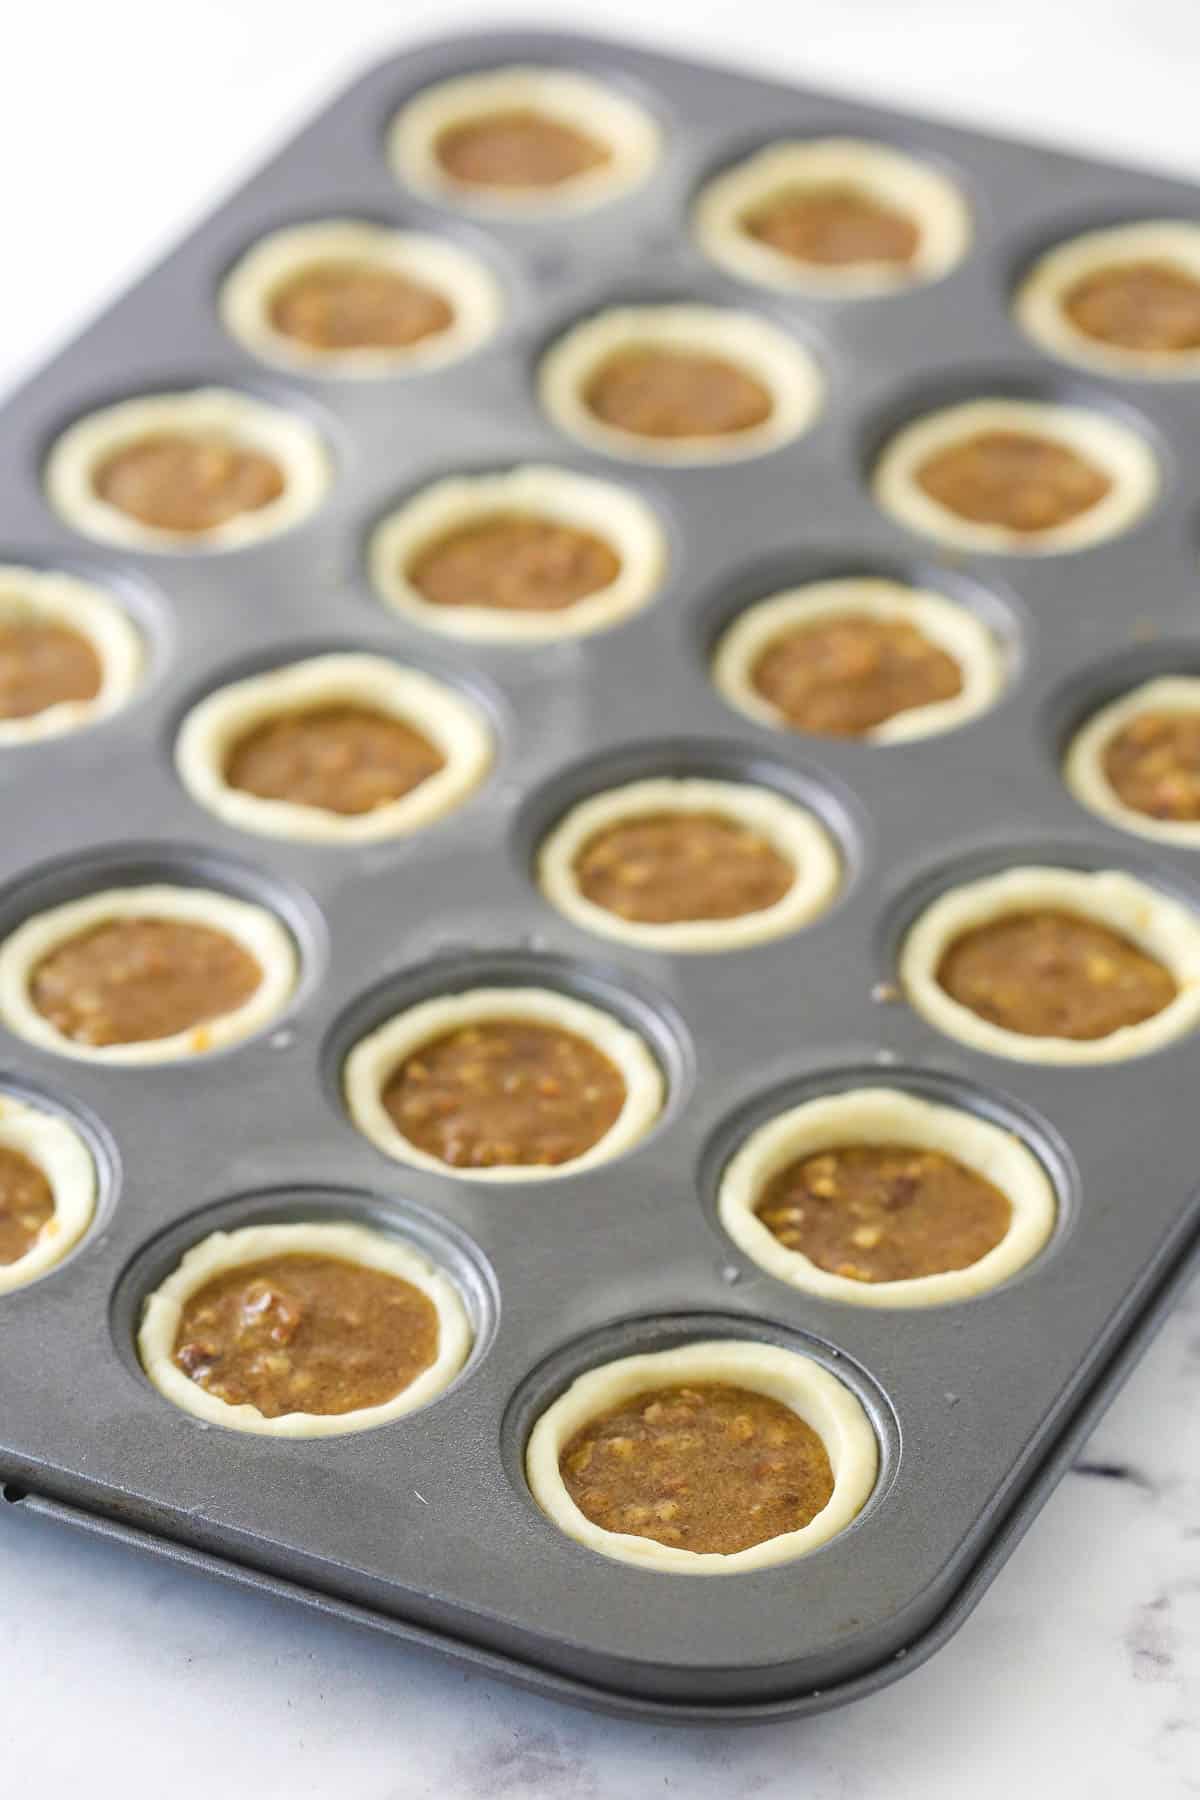 Adding the pecan filling to the muffin cups